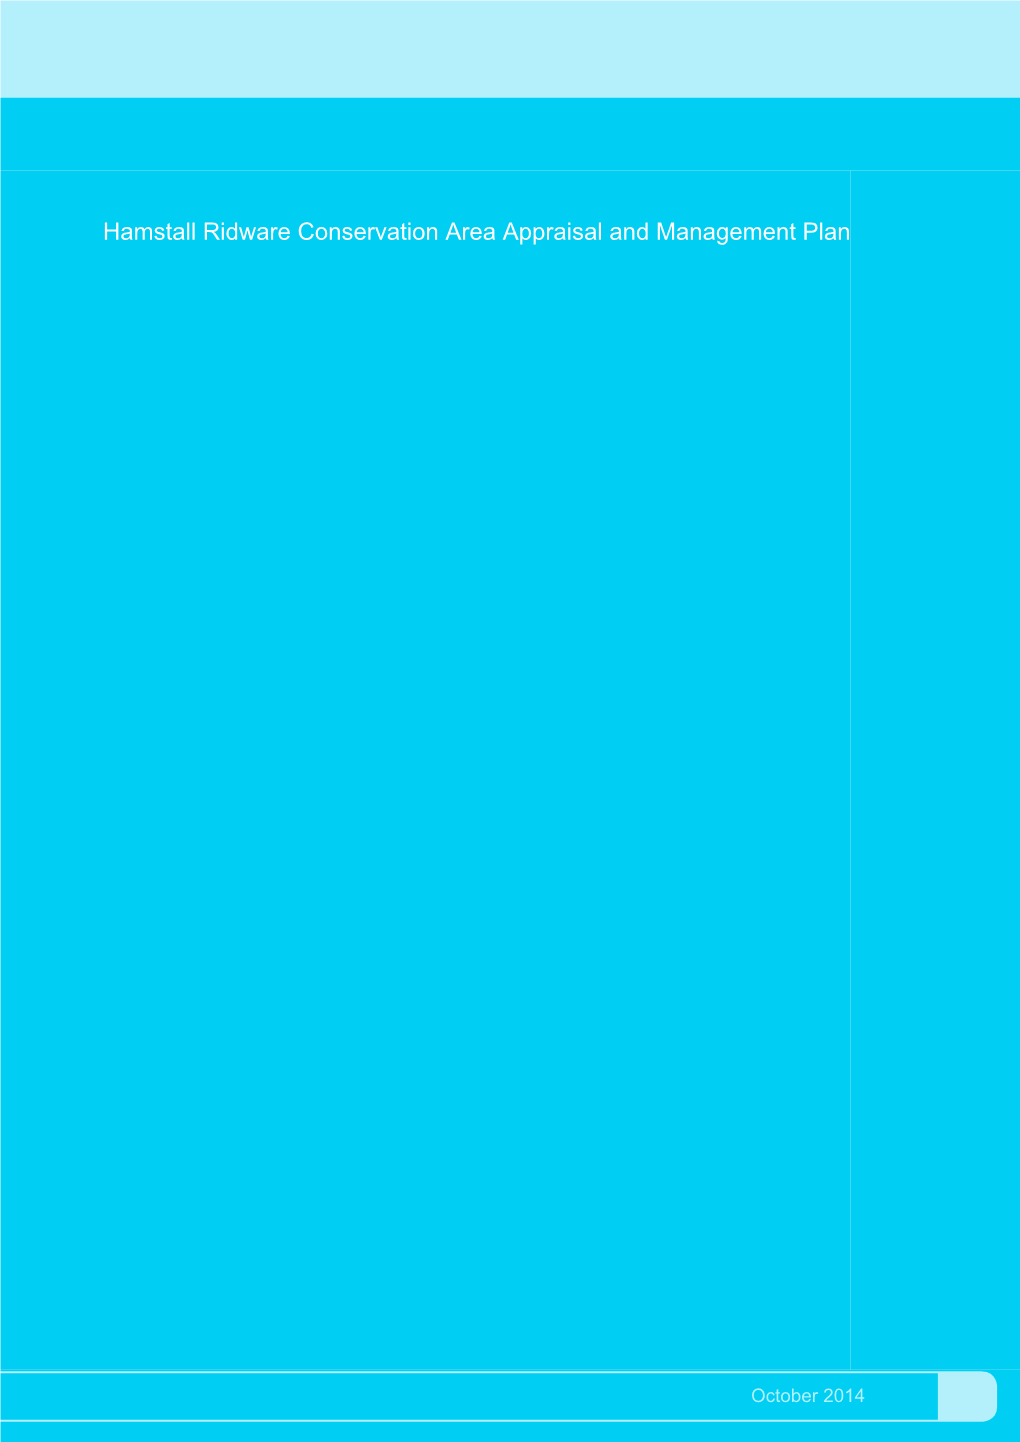 Hamstall Ridware Conservation Area Appraisal and Management Plan